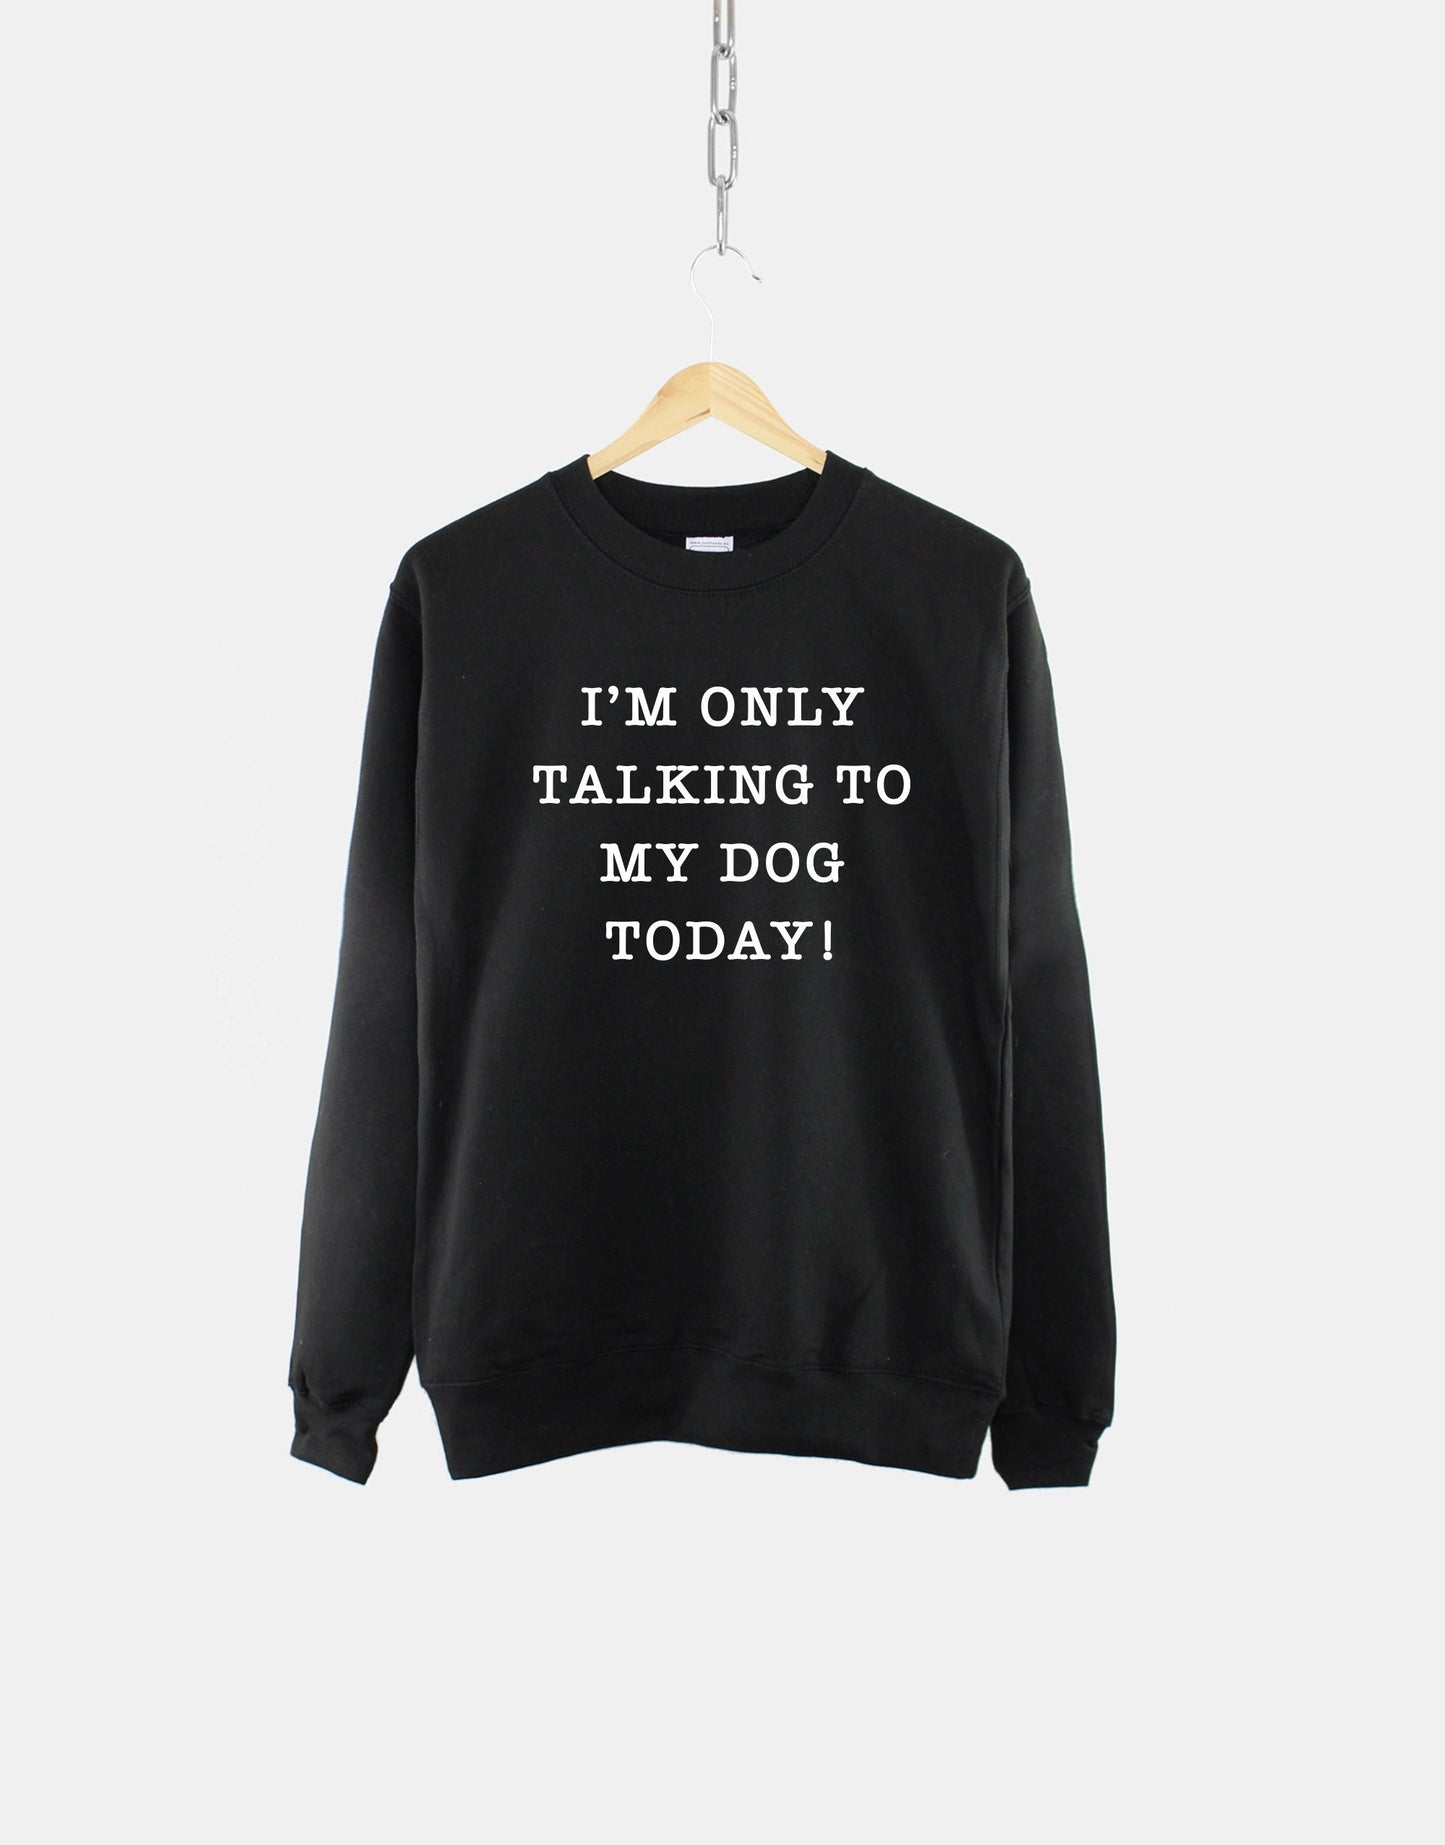 I'm Only Talking To My Dog Today Sweatshirt - Dog Mama Sweatshirt - Dog Mum Sweatshirt - Dog Owner Jumper - Dog Lover Gift